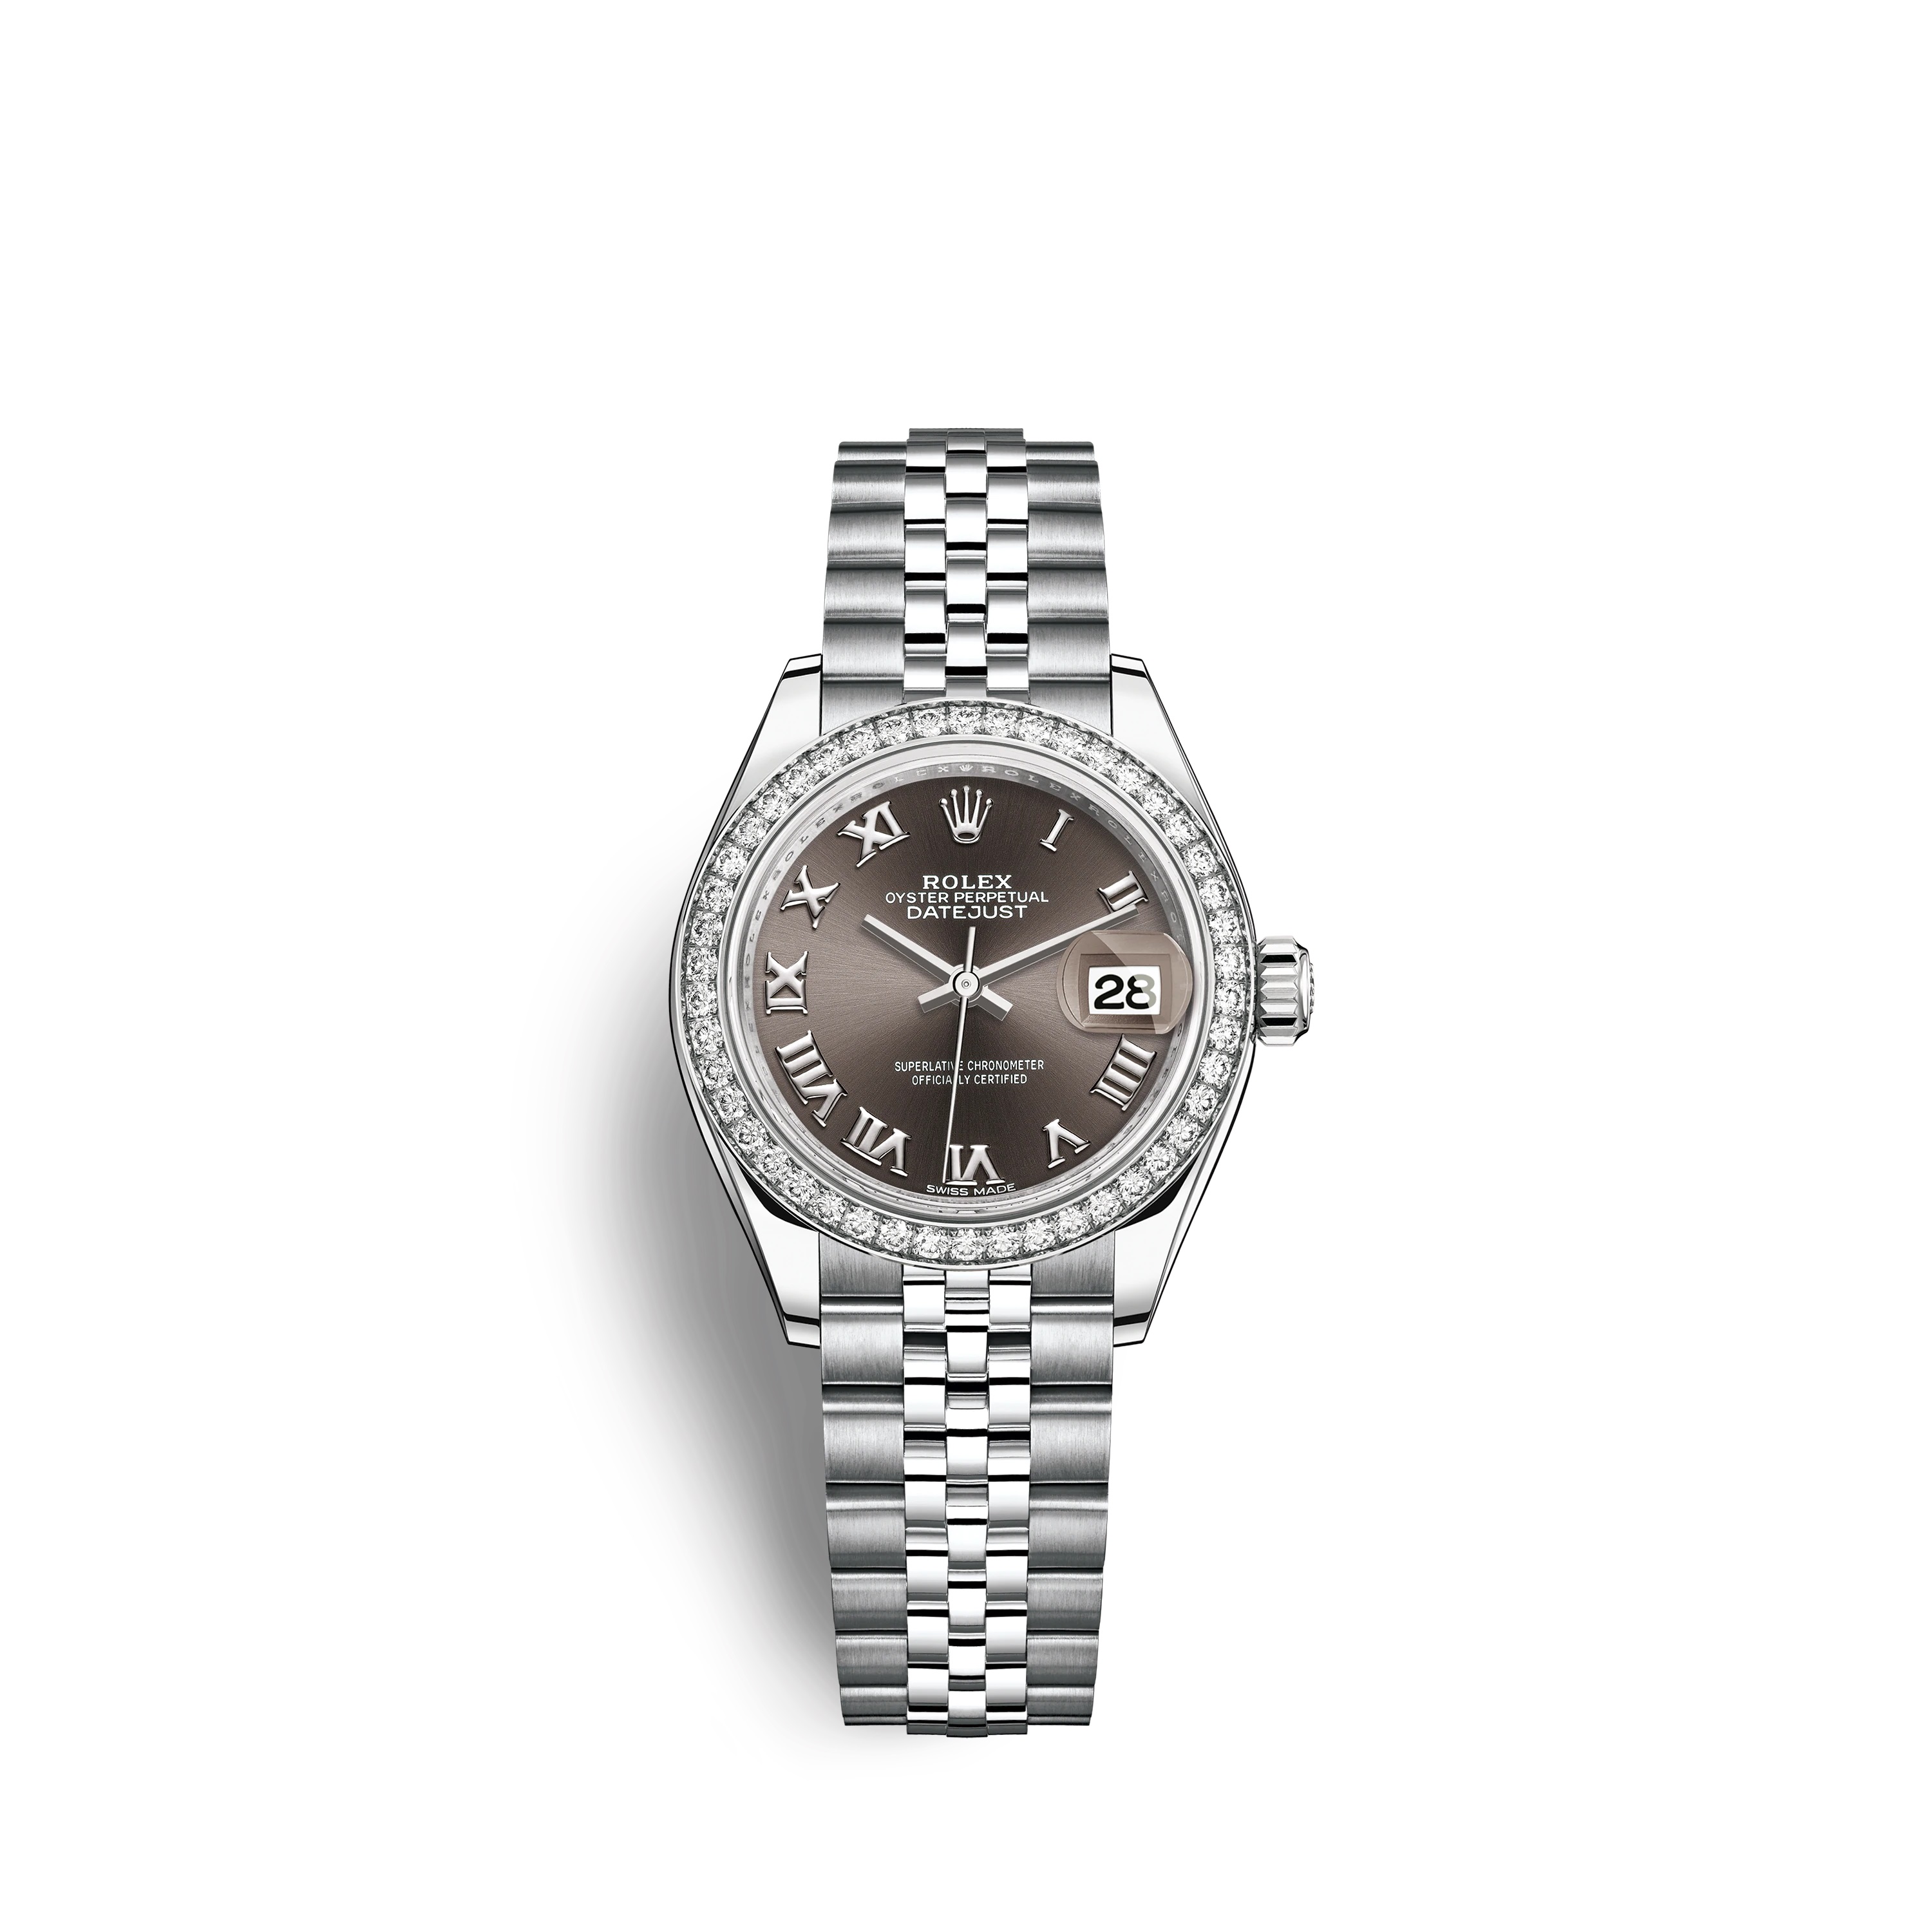 Lady-Datejust 28 279384RBR White Gold & Stainless Steel Watch (Dark Grey) - Click Image to Close